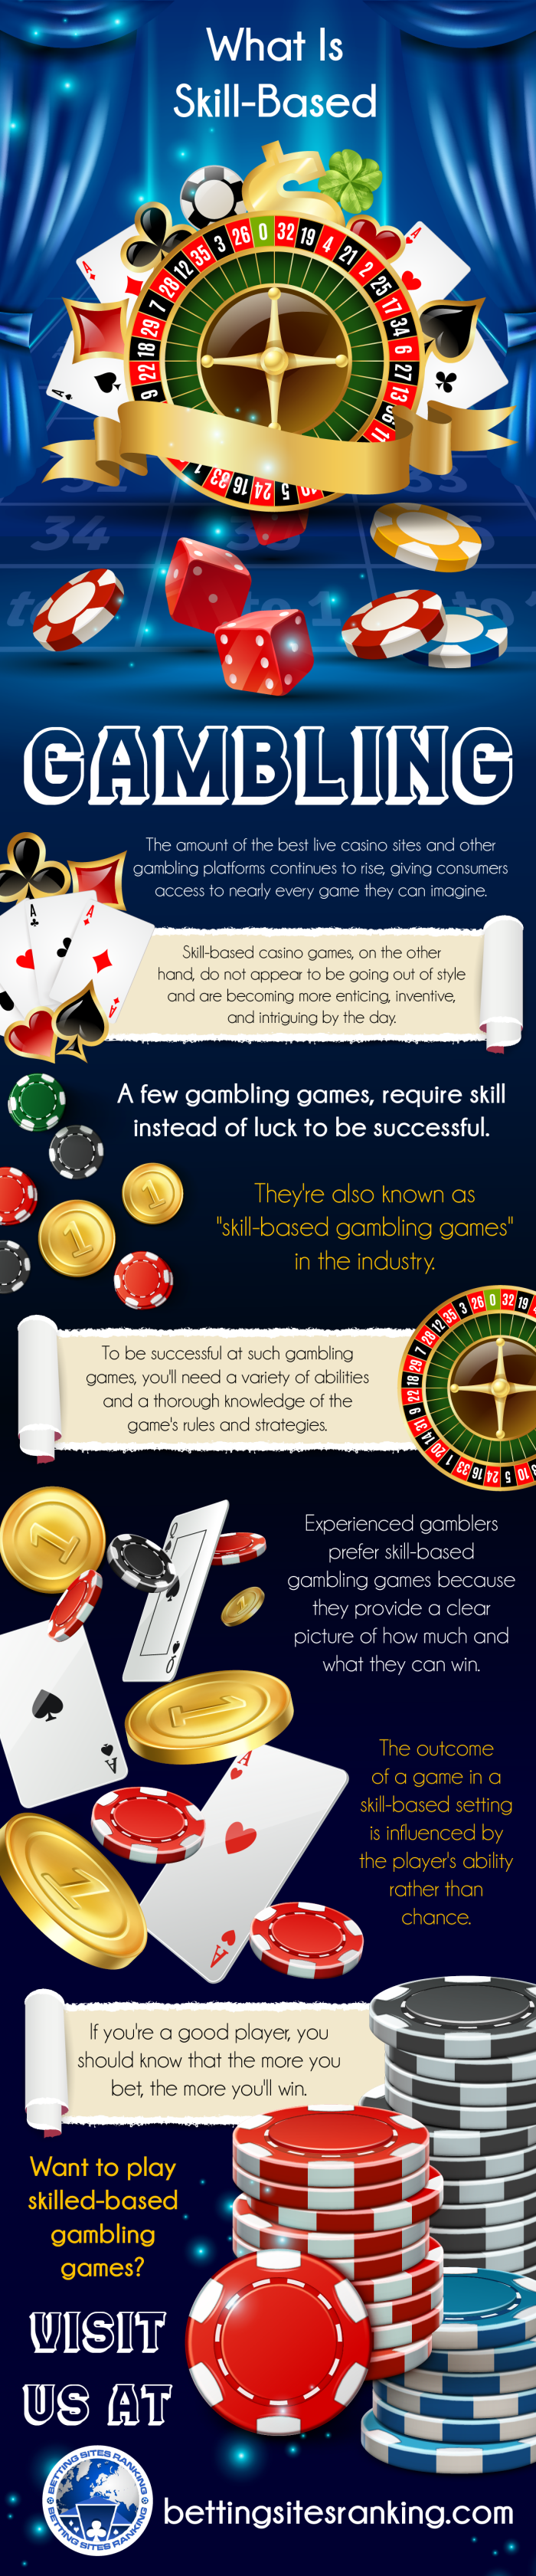 What is skill-based Gambling